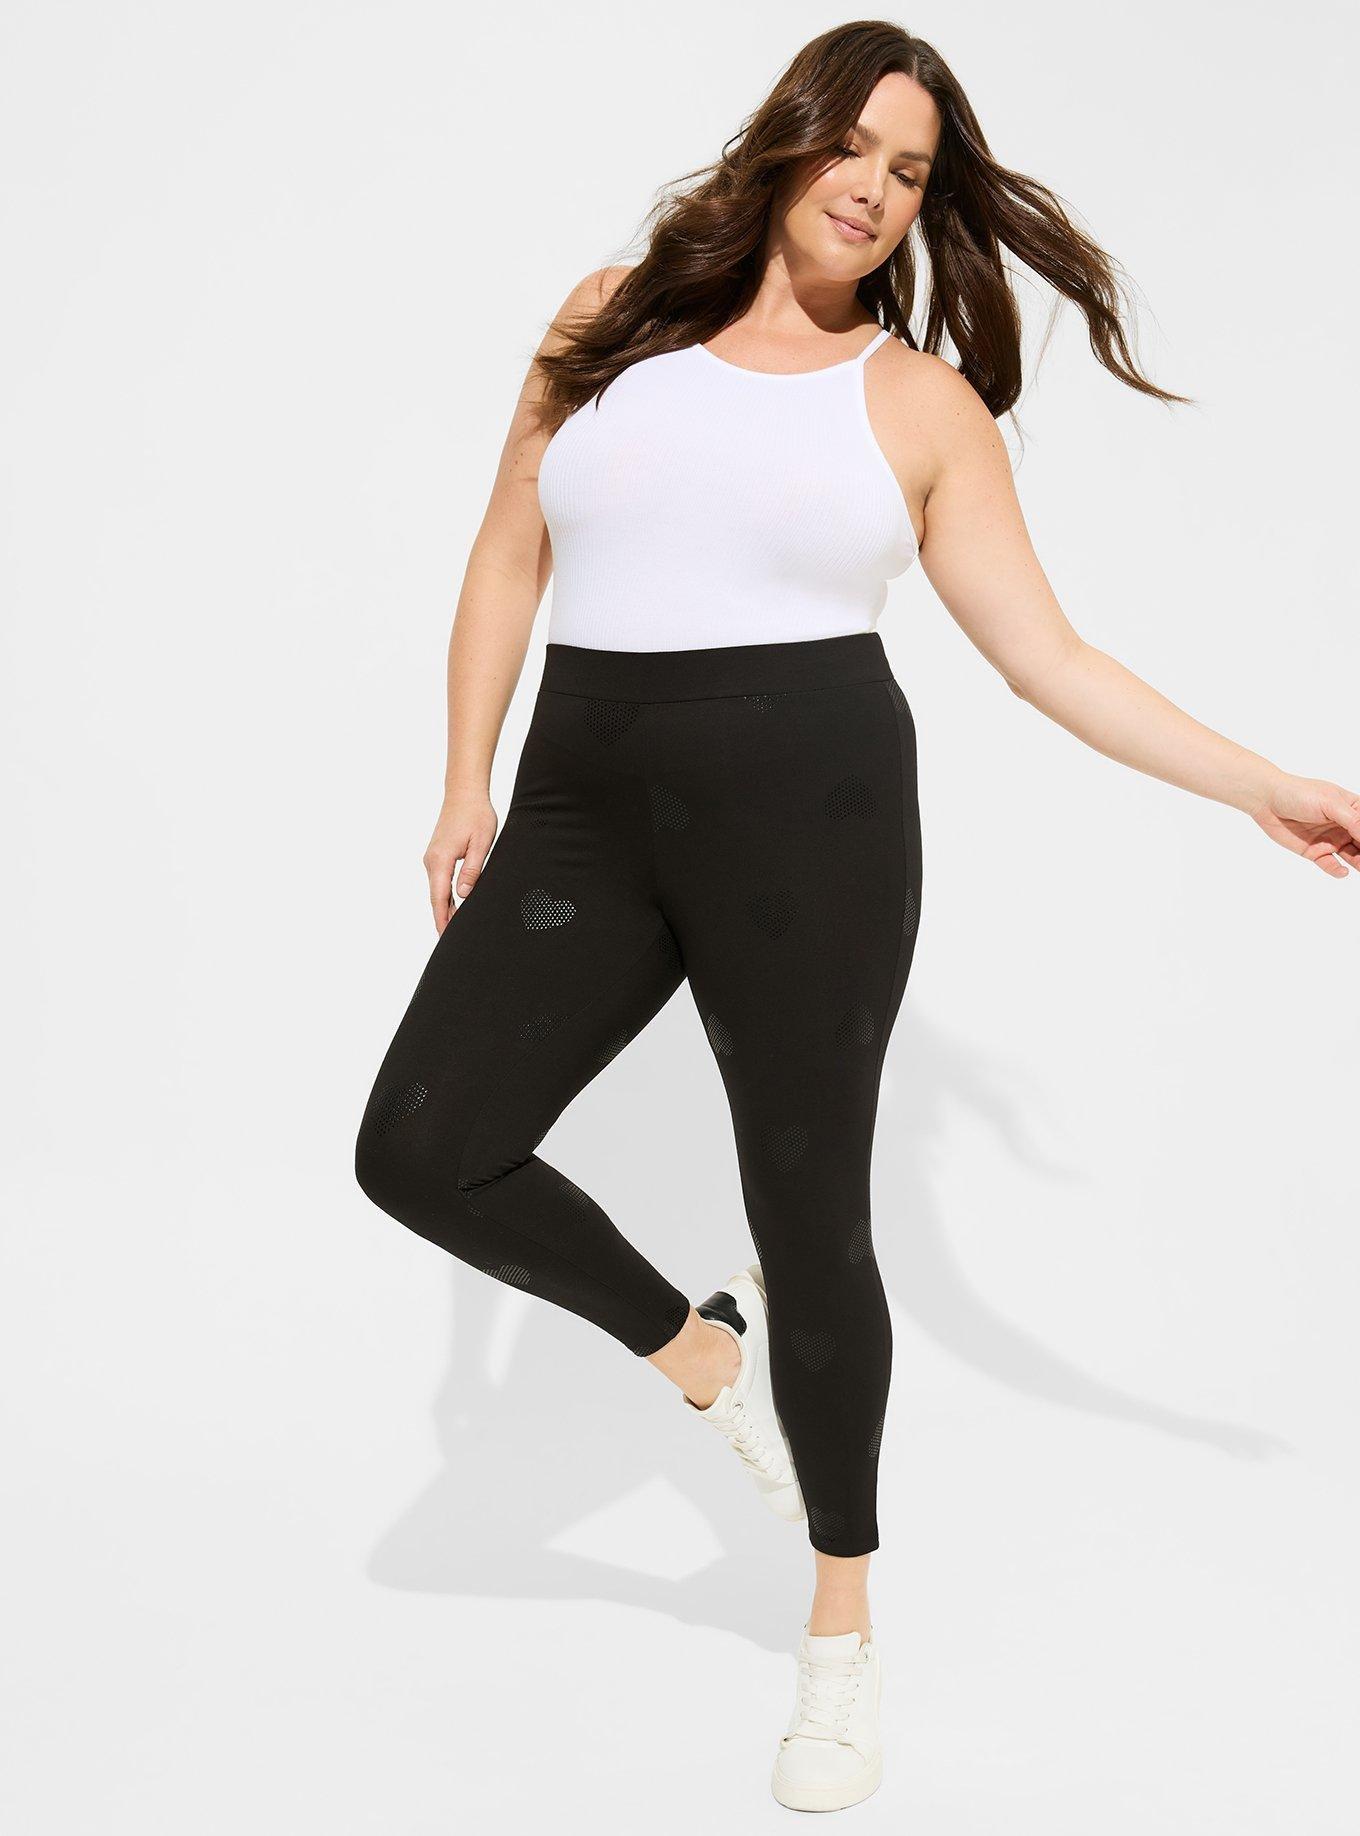 I'm 5' 11 and I swear by these $17 Costco yoga pants